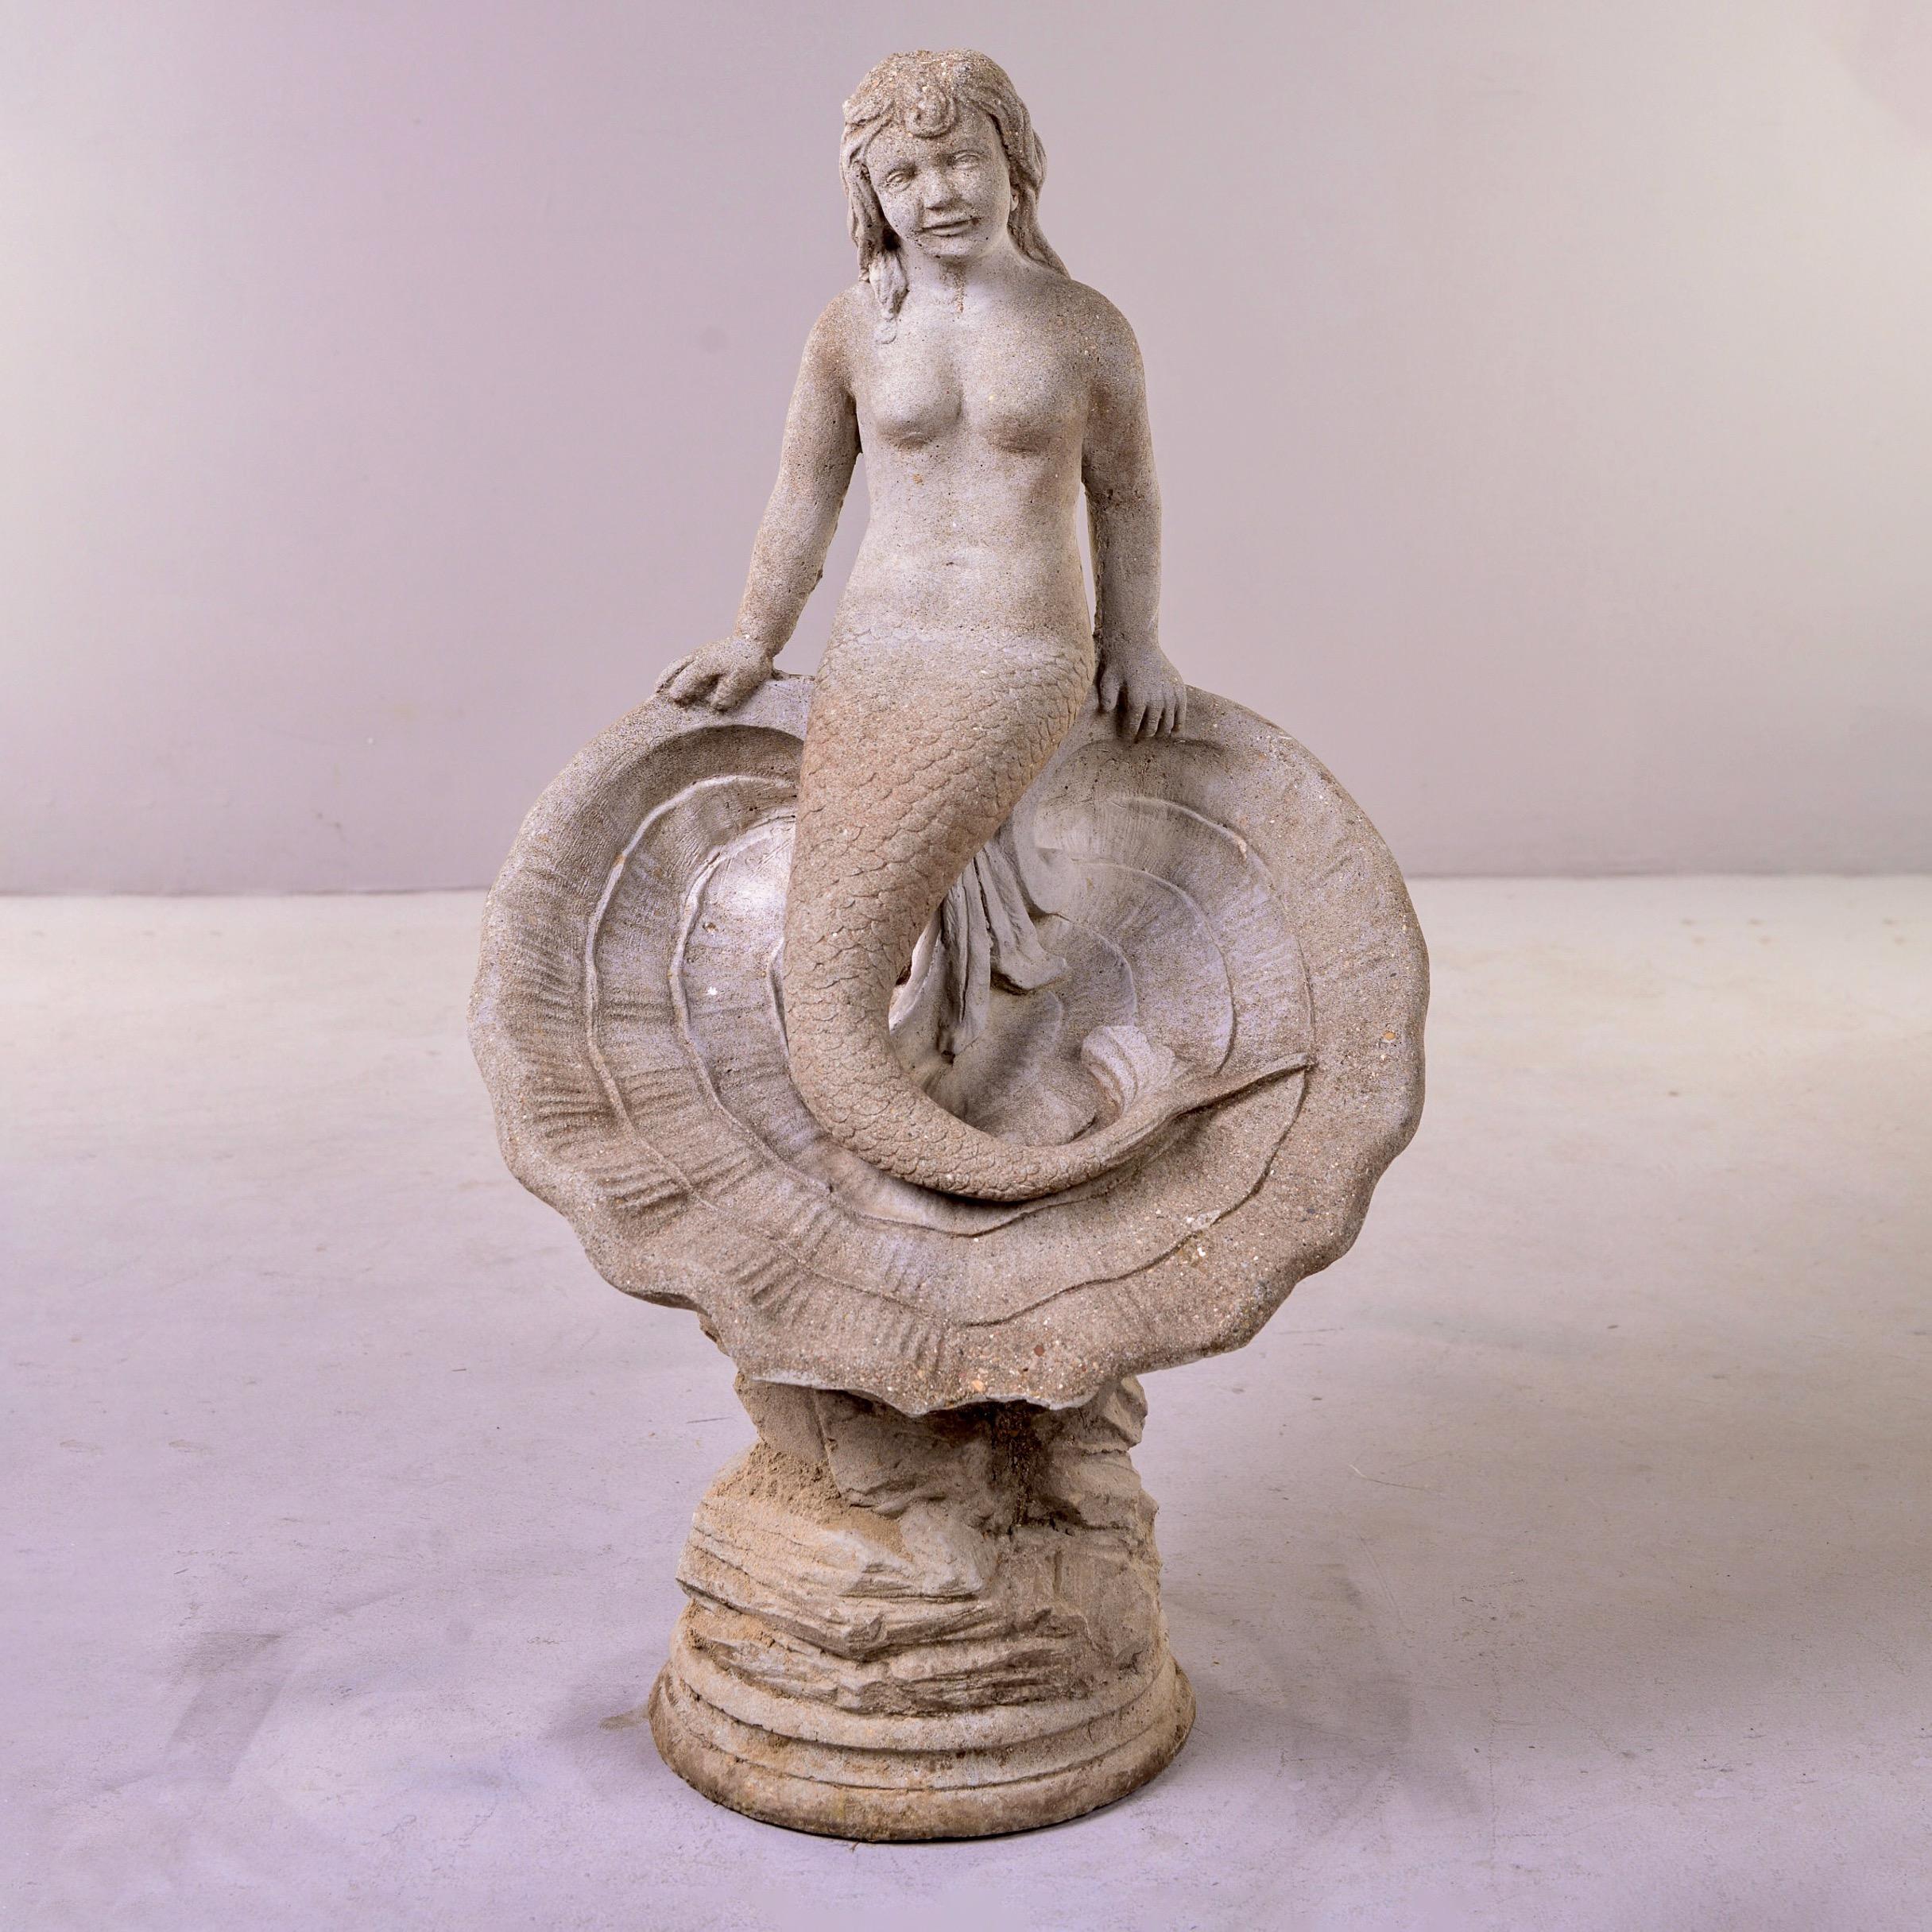 Circa 1950s garden statue of a mermaid perched on a shell. This stands over three feet tall. Some scattered age-related patina/moss to surfaces. 

One chip to scallop edge at bottom of clamshell - see last detail photo.